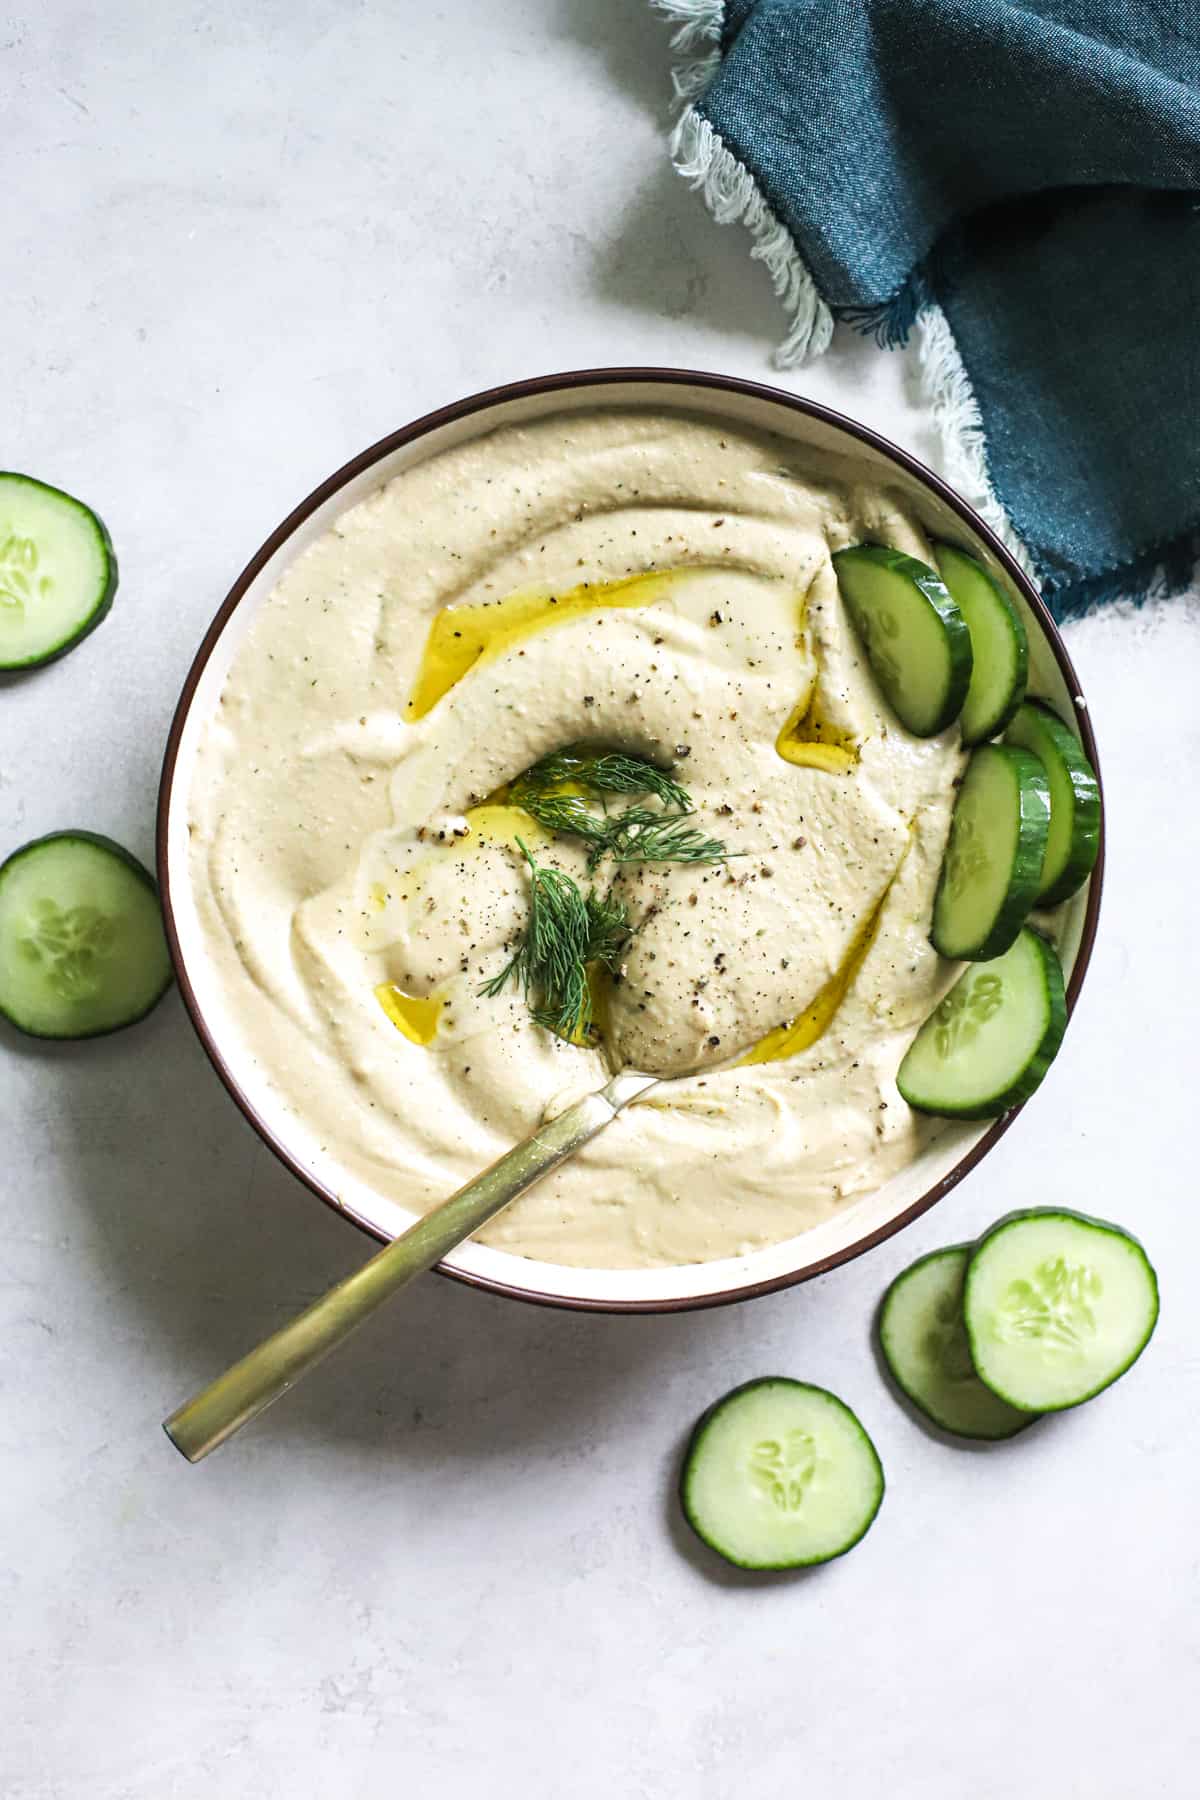 Lemon dill hummus in beige serving dish with olive oil drizzled on top, cucumbers dipped in and on the side, and golden spoon scooped into the hummus